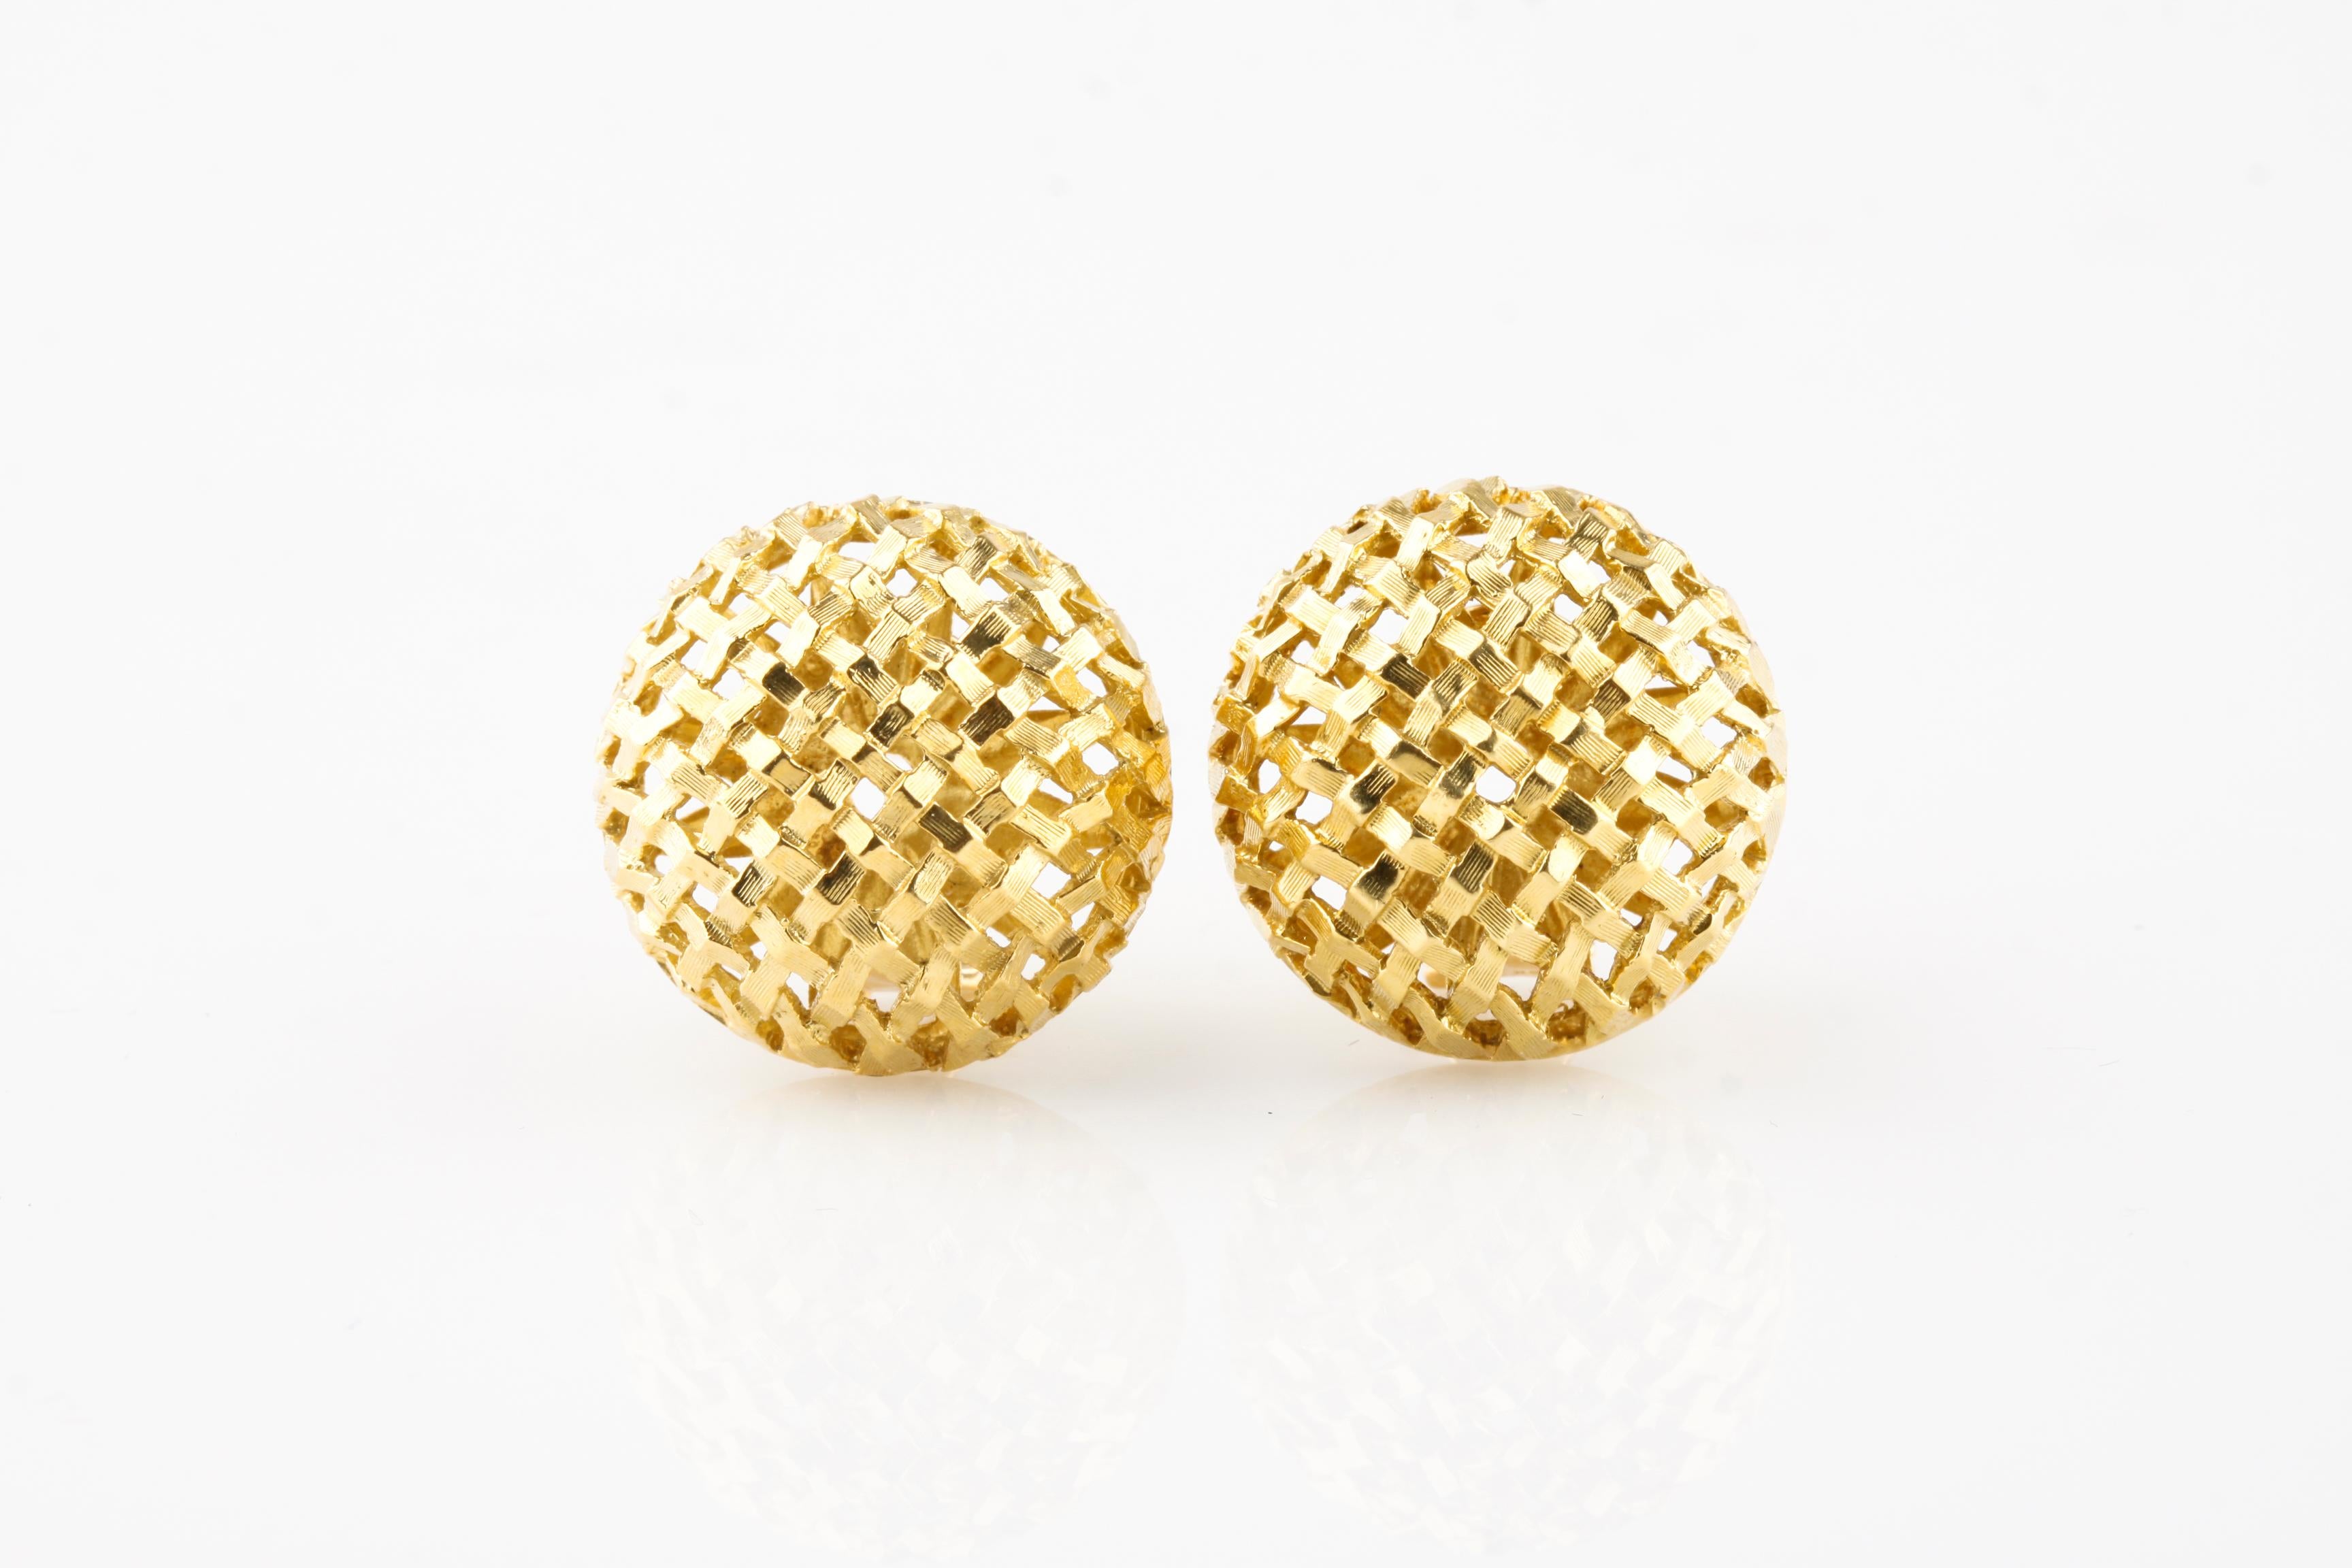 Beautiful Delicate Basketweave 18k Yellow Gold Earrings
Design Domed Over Circular Setting
Diameter of Setting = 20 mm
Total Mass = 15.1 grams
Gorgeous, Unique Gift!